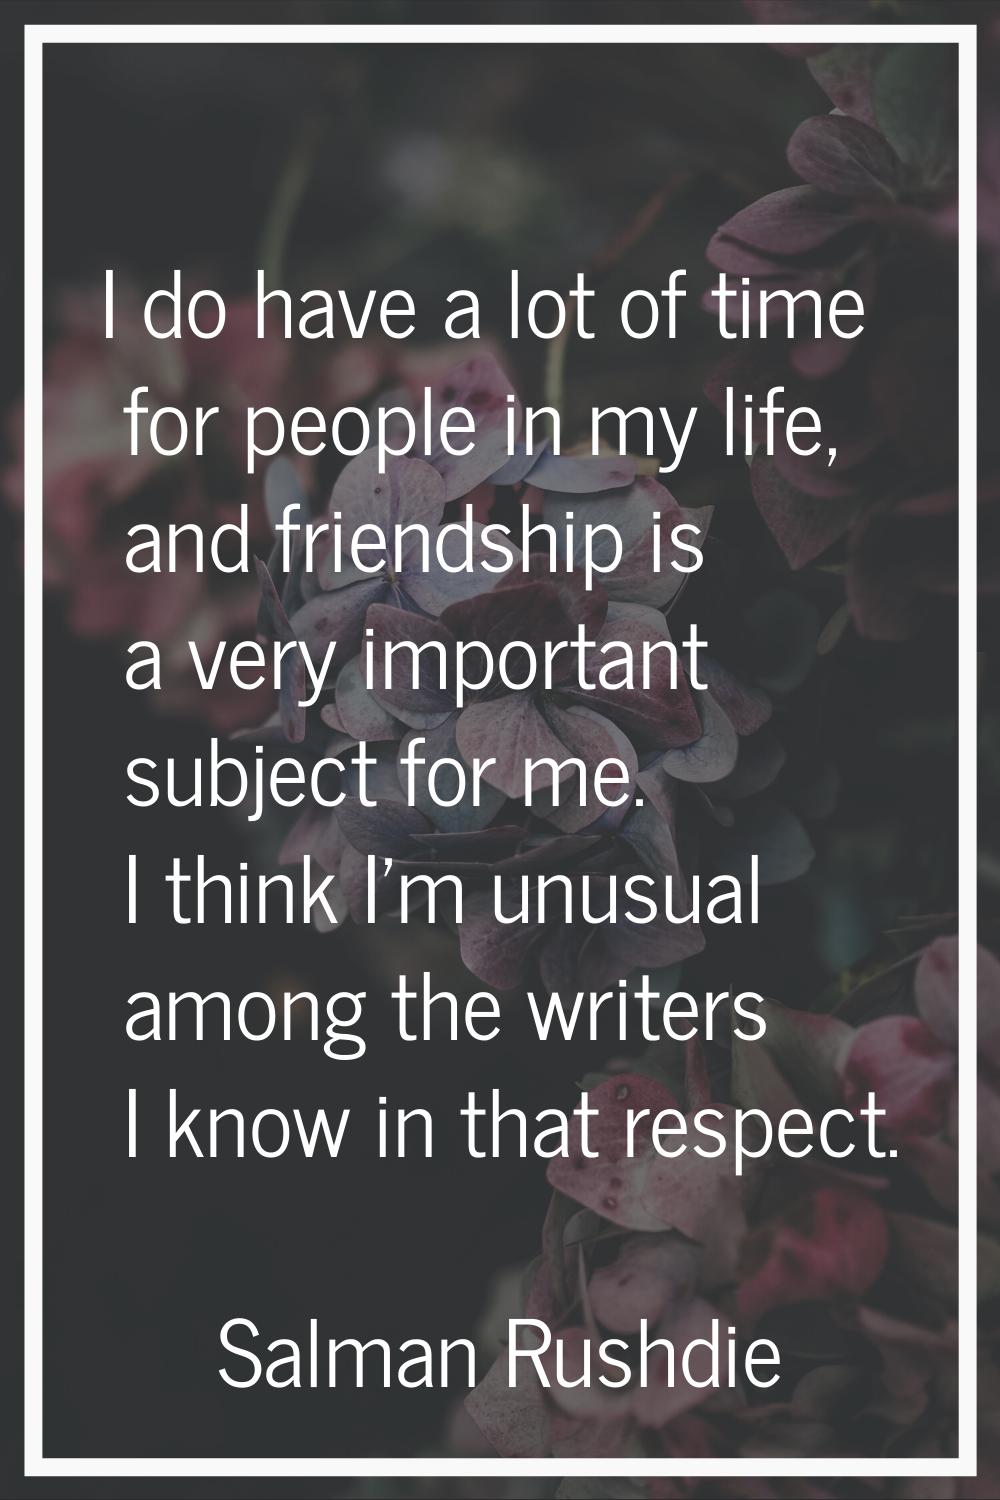 I do have a lot of time for people in my life, and friendship is a very important subject for me. I